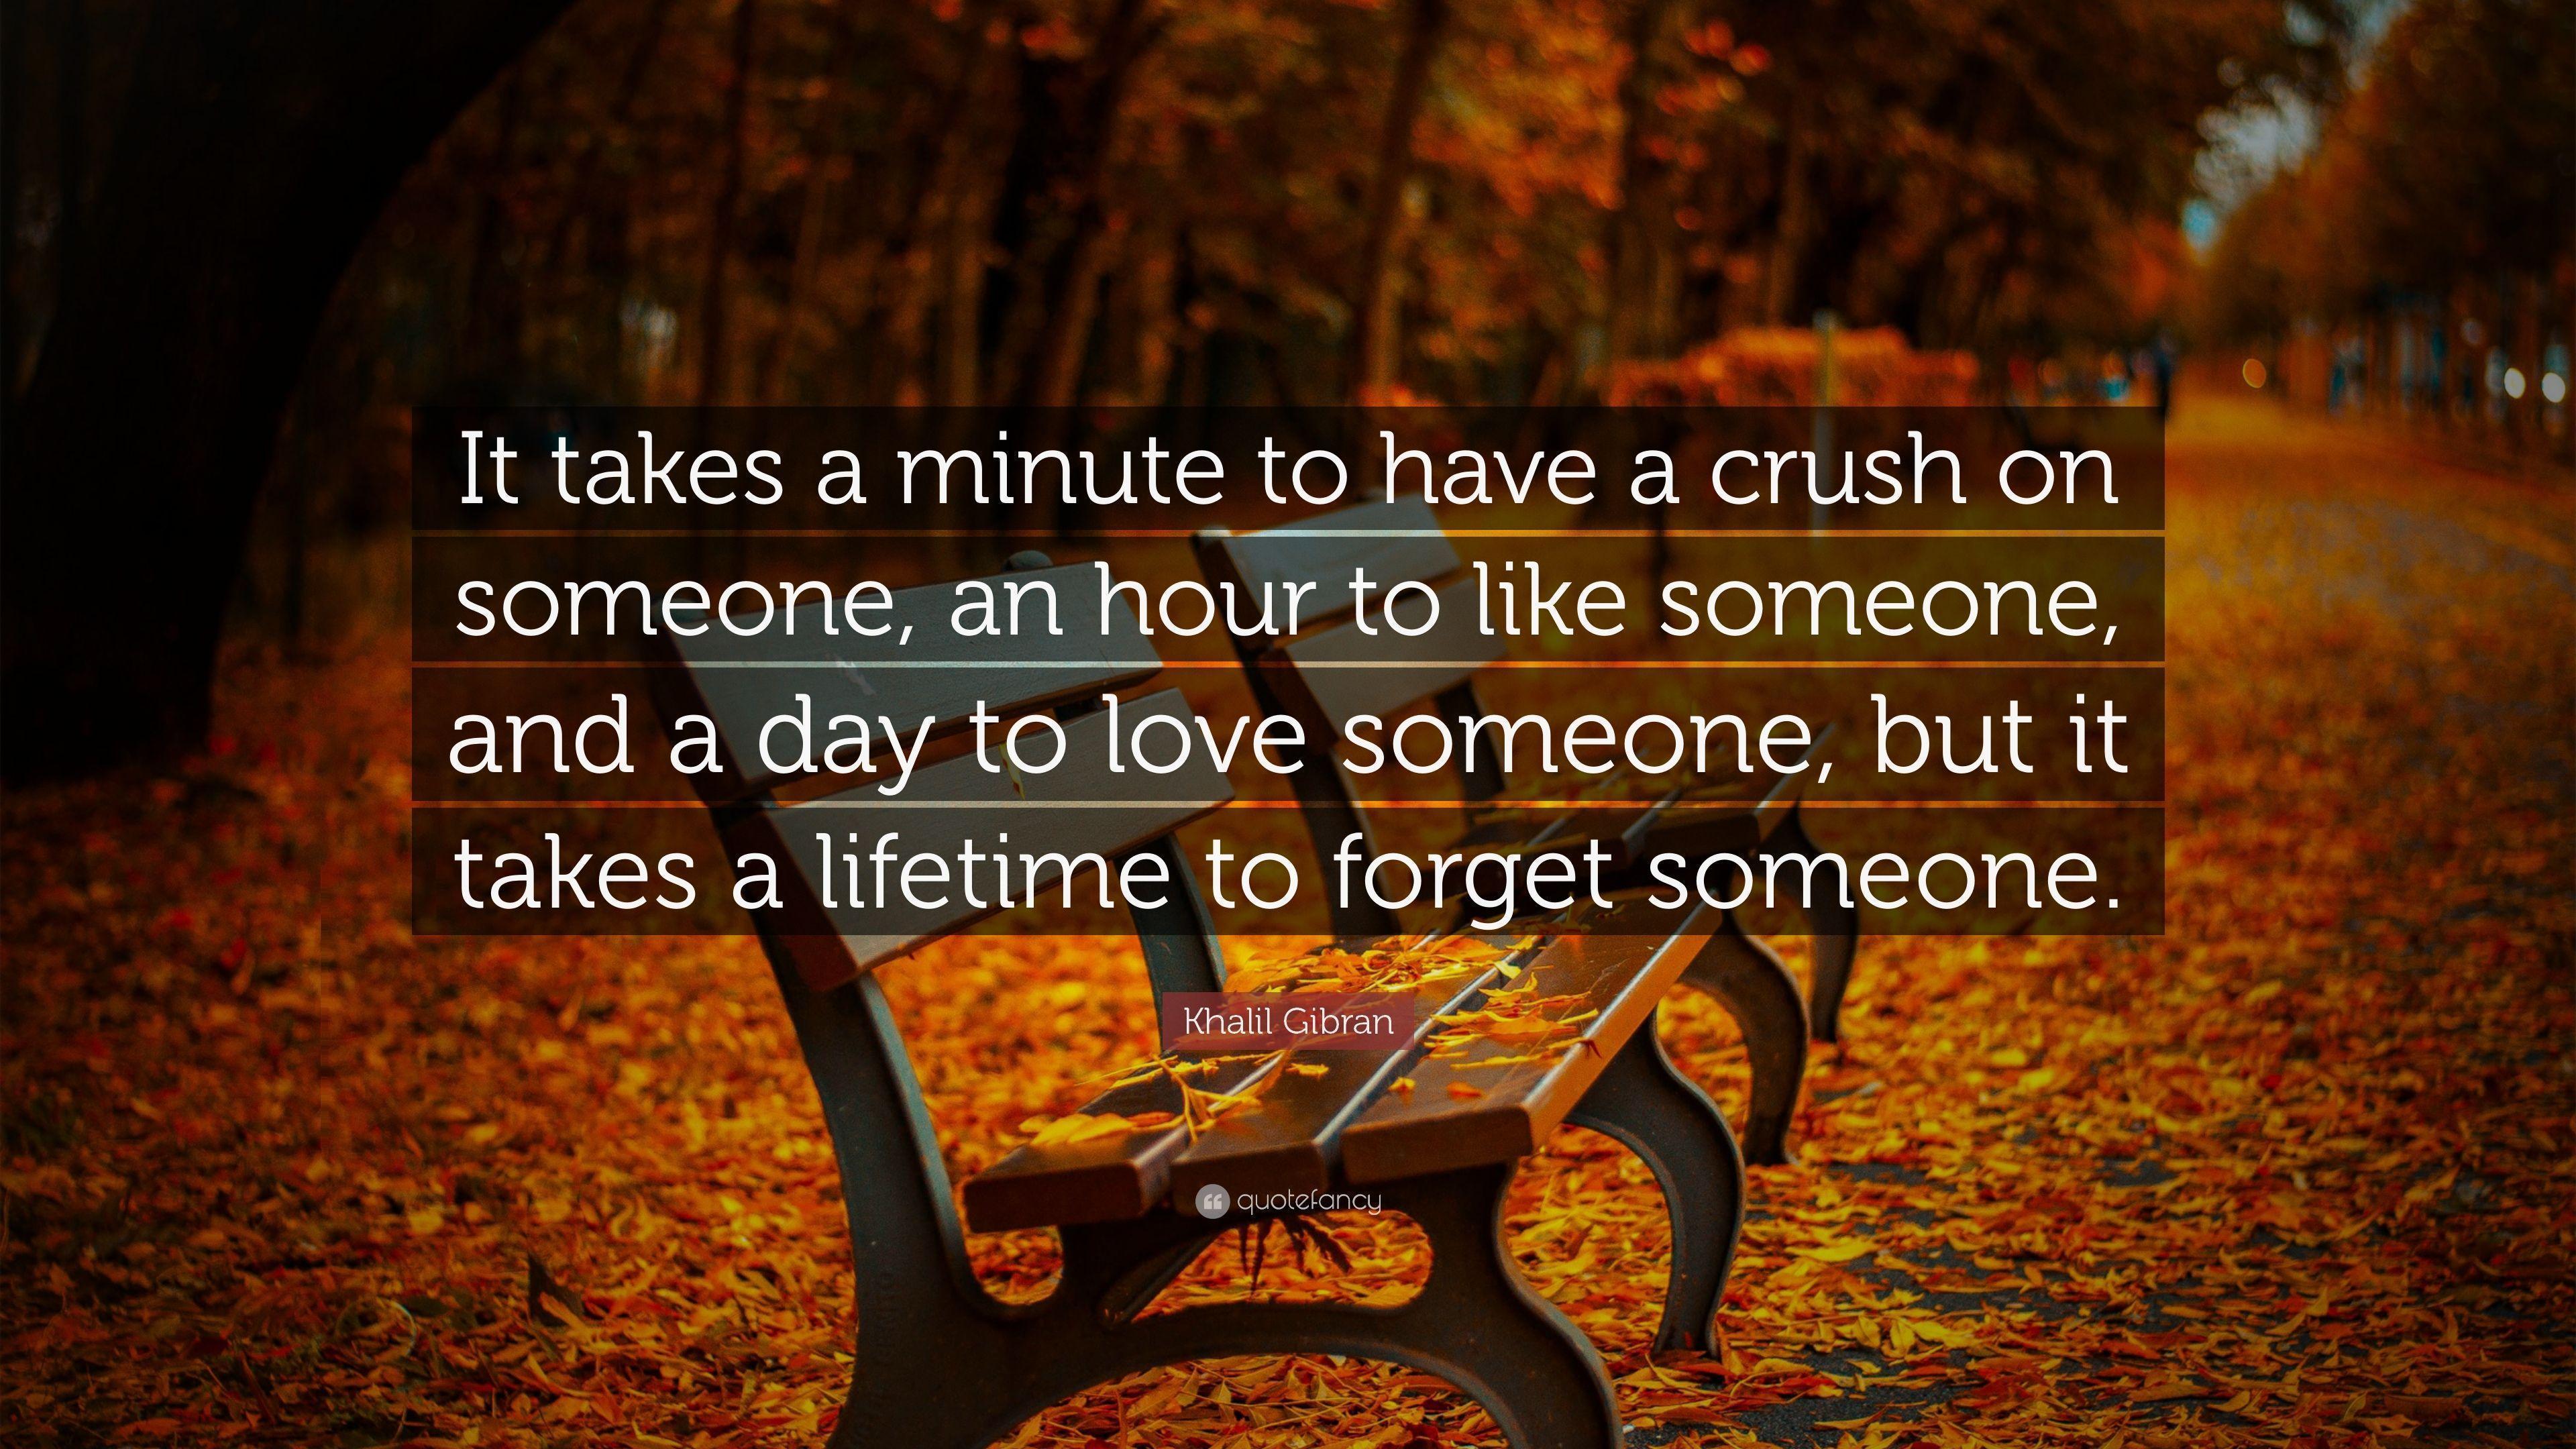 Khalil Gibran Quote: “It takes a minute to have a crush on someone